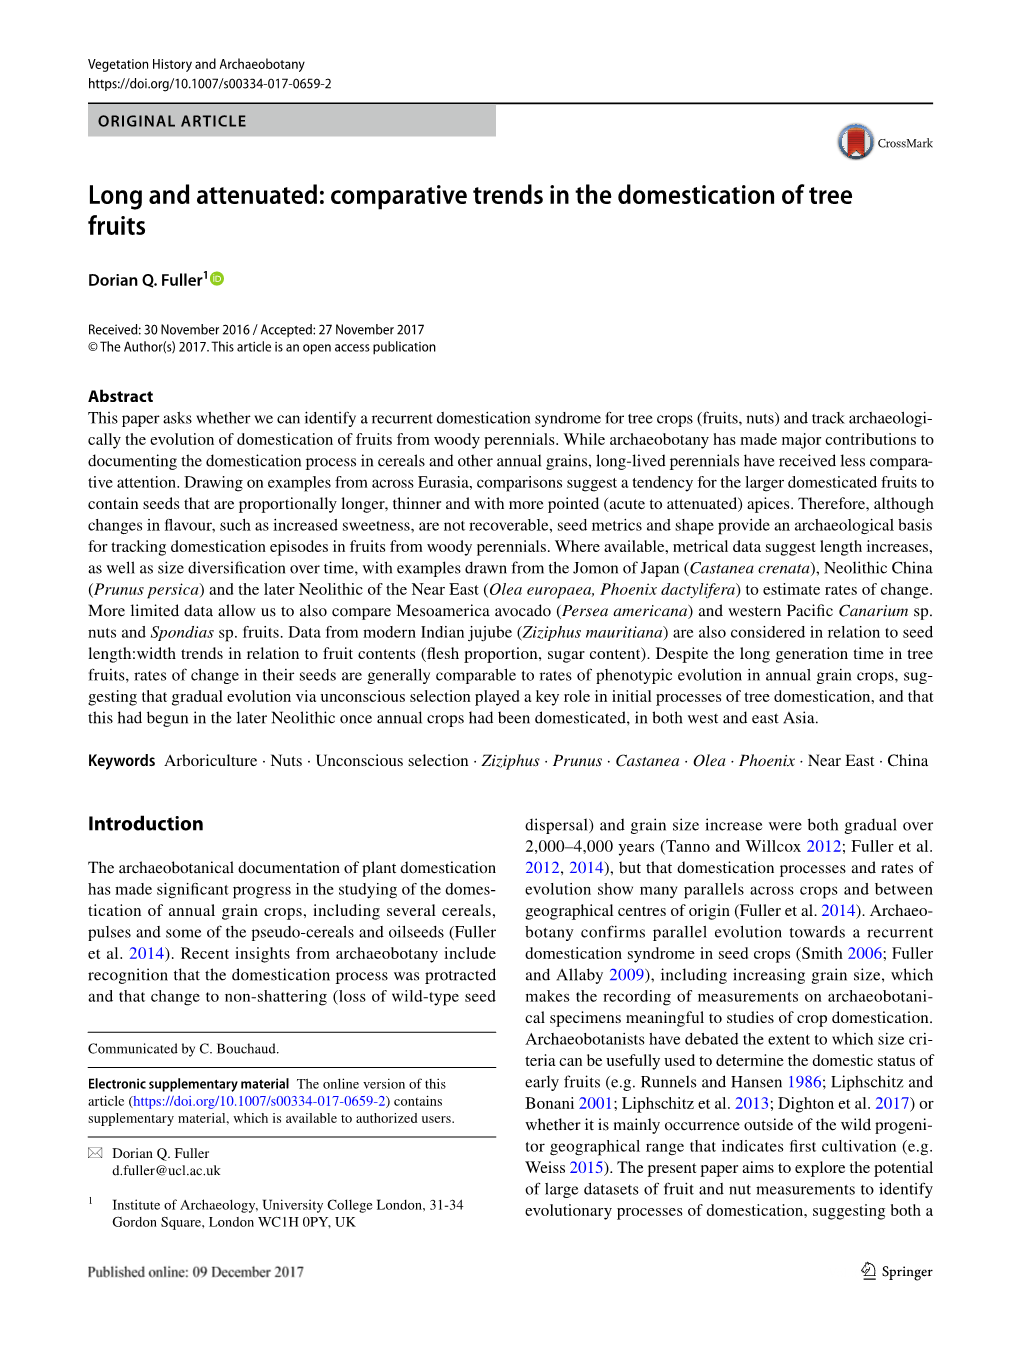 Long and Attenuated: Comparative Trends in the Domestication of Tree Fruits